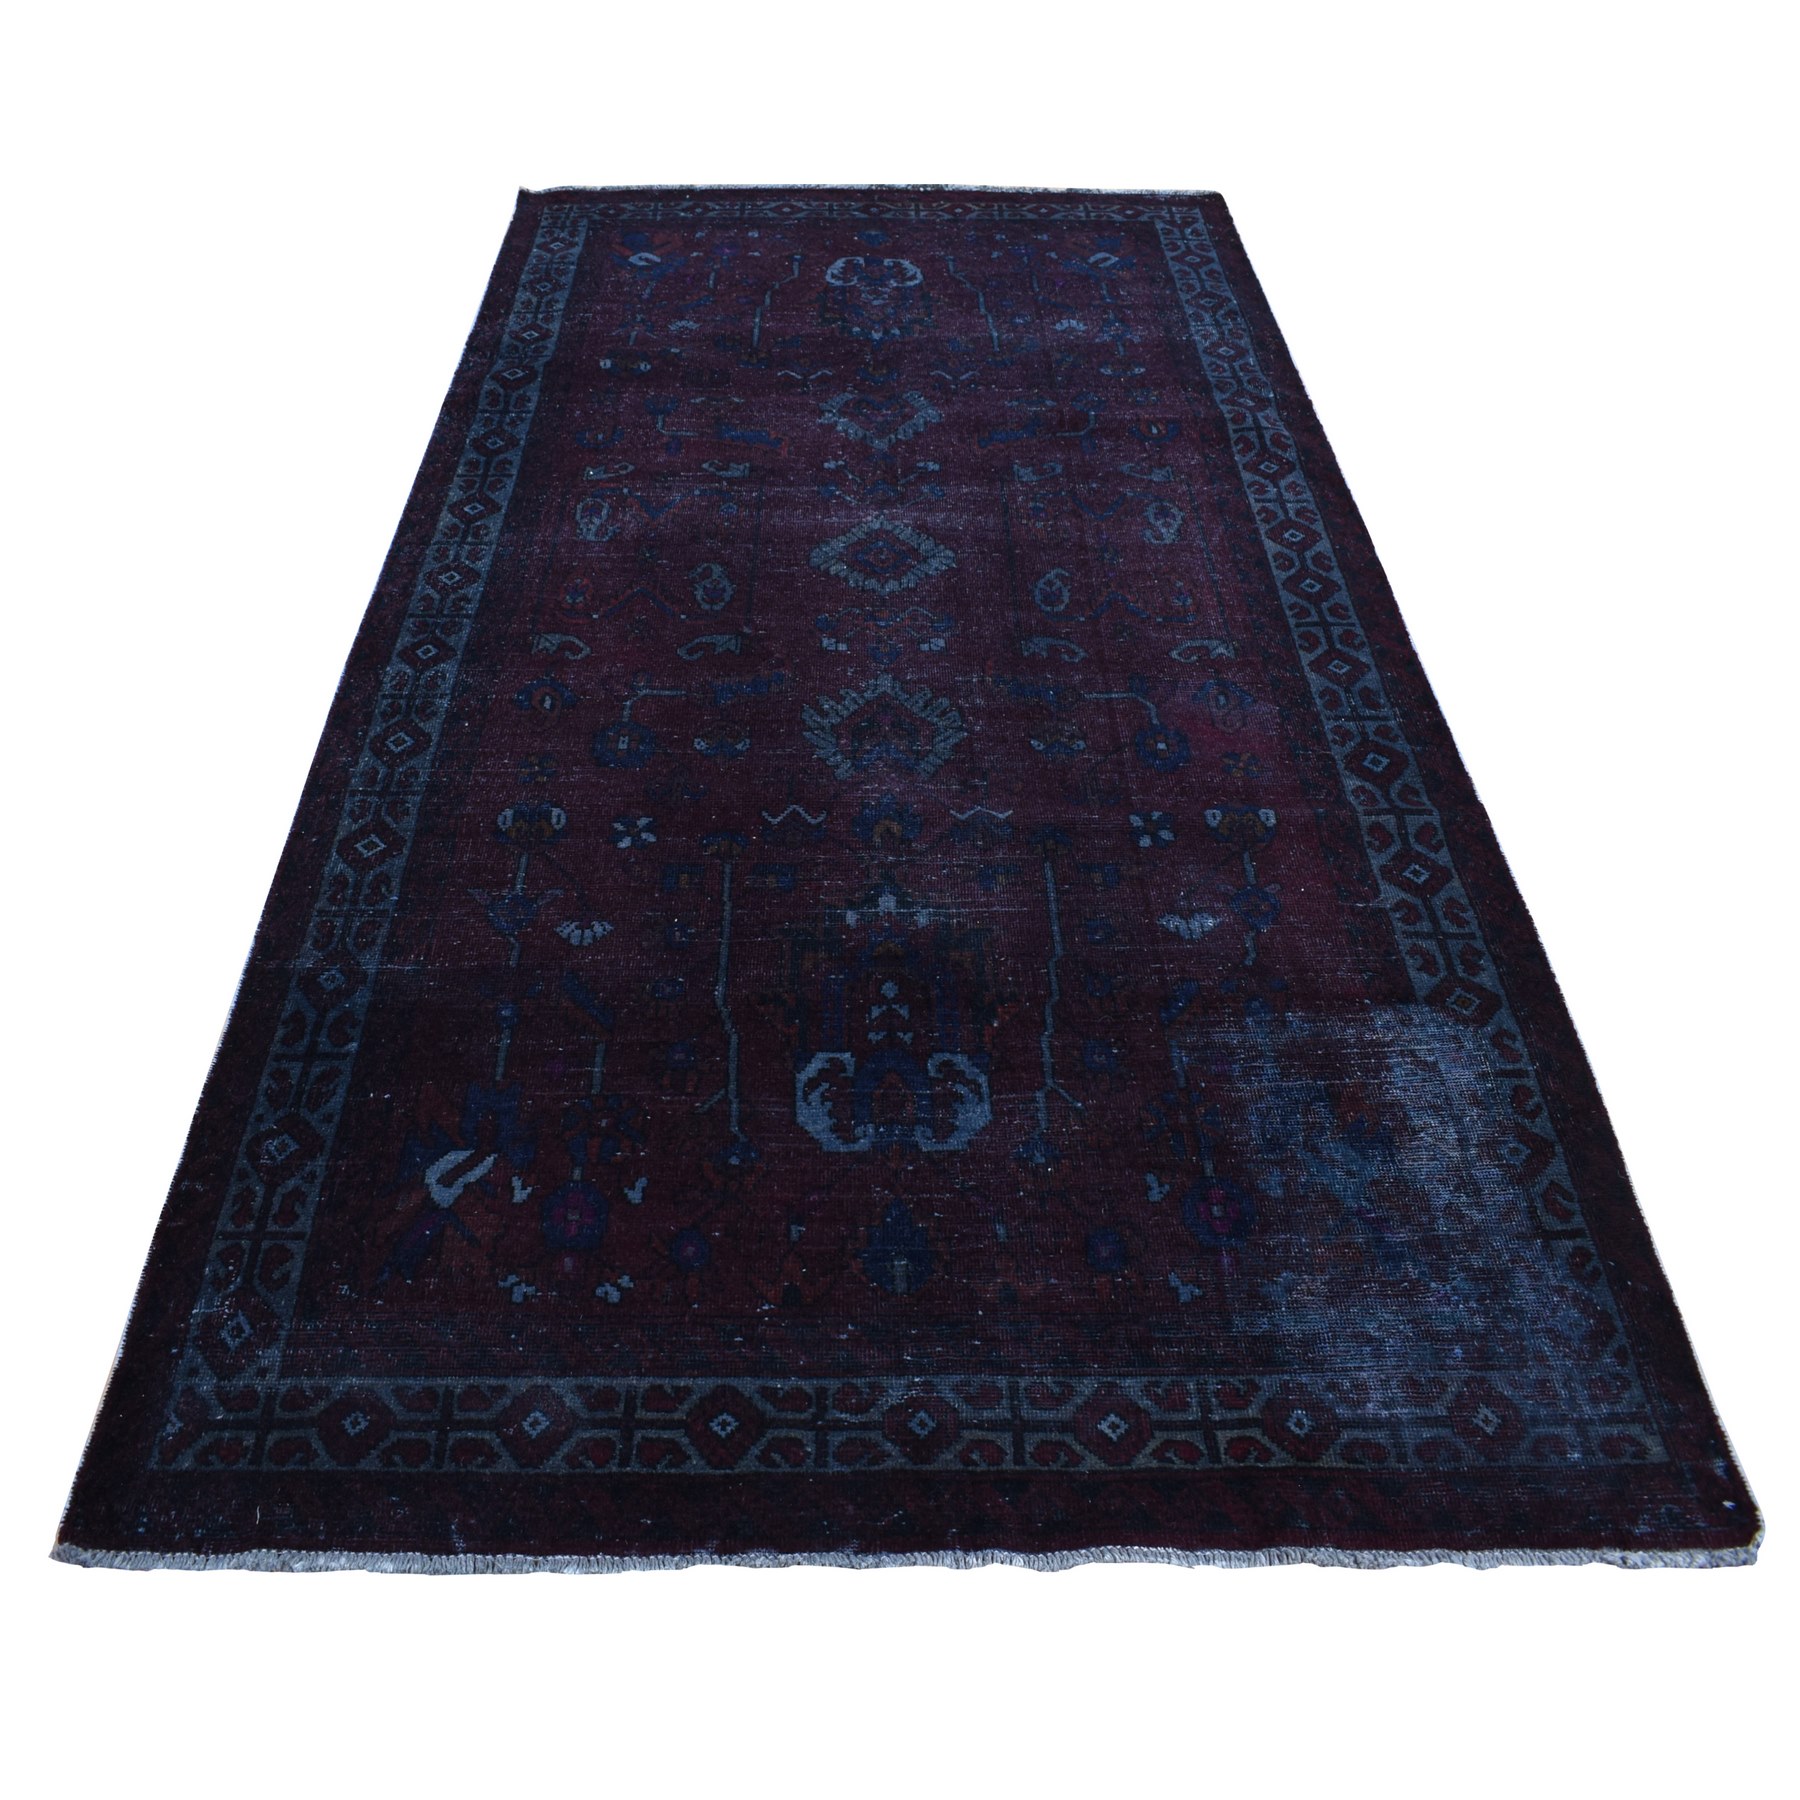  Wool Hand-Knotted Area Rug 5'4